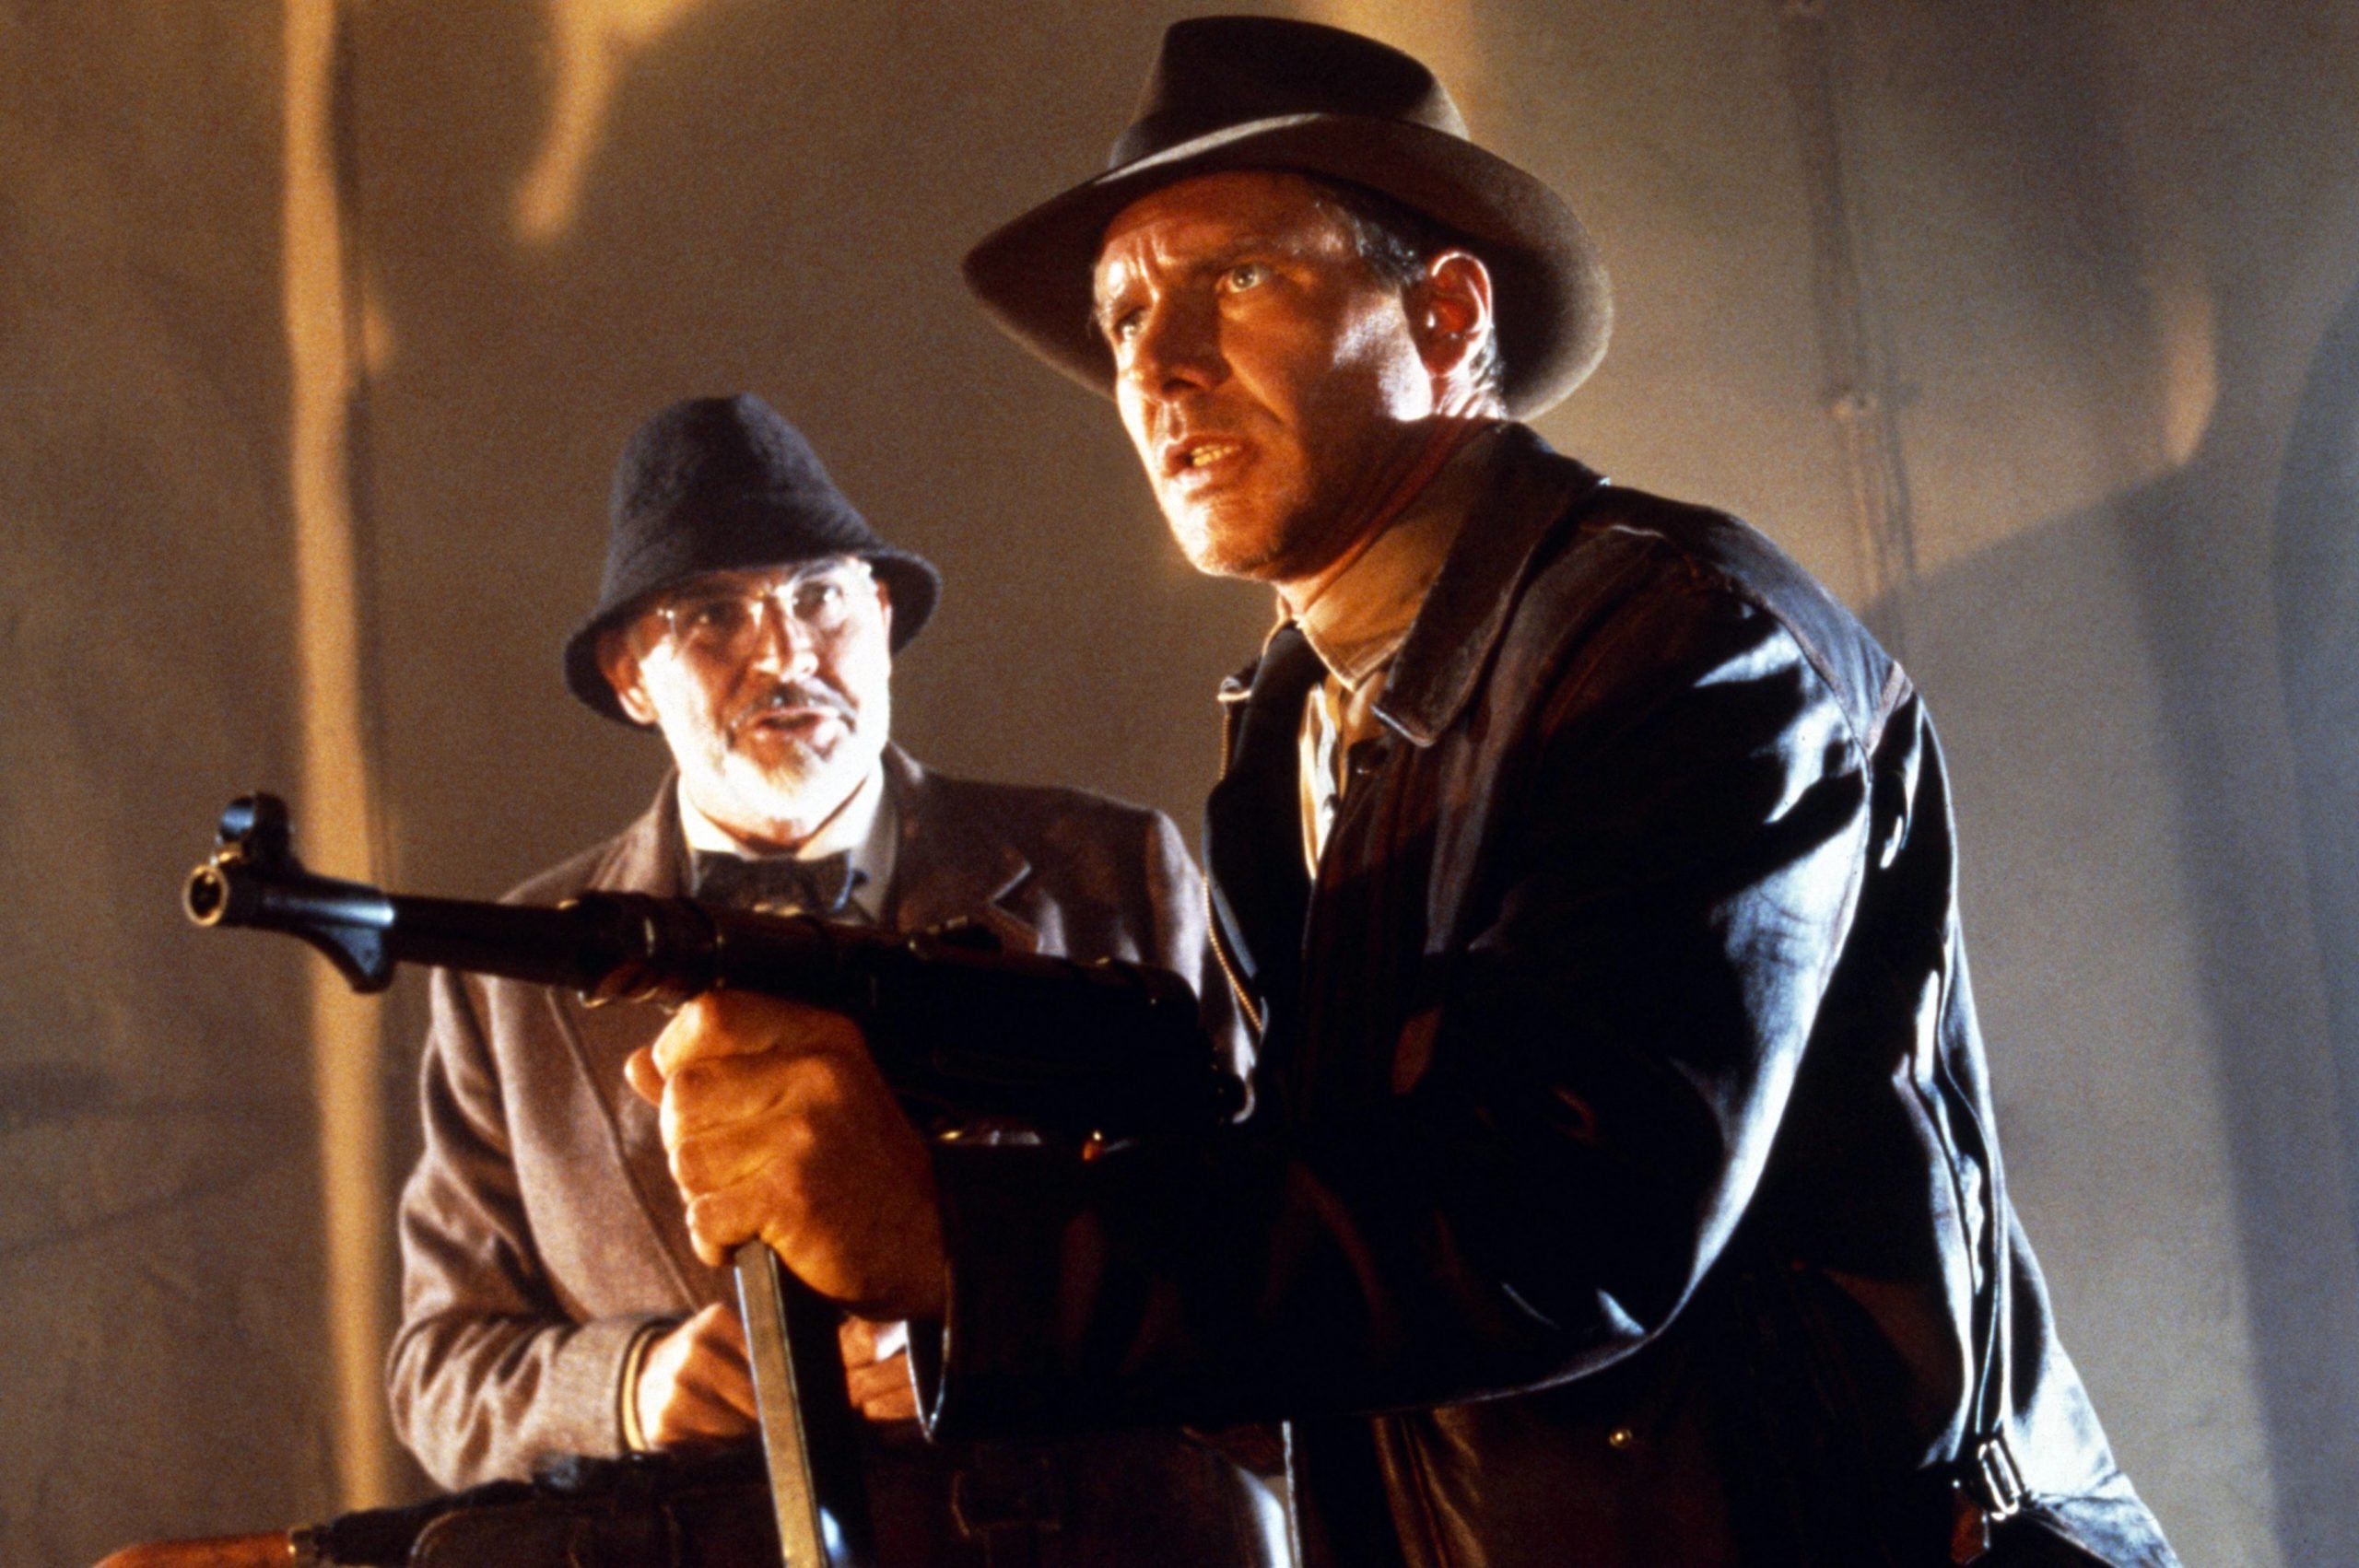 Harrison Ford joins a fifth film as Indiana Jones